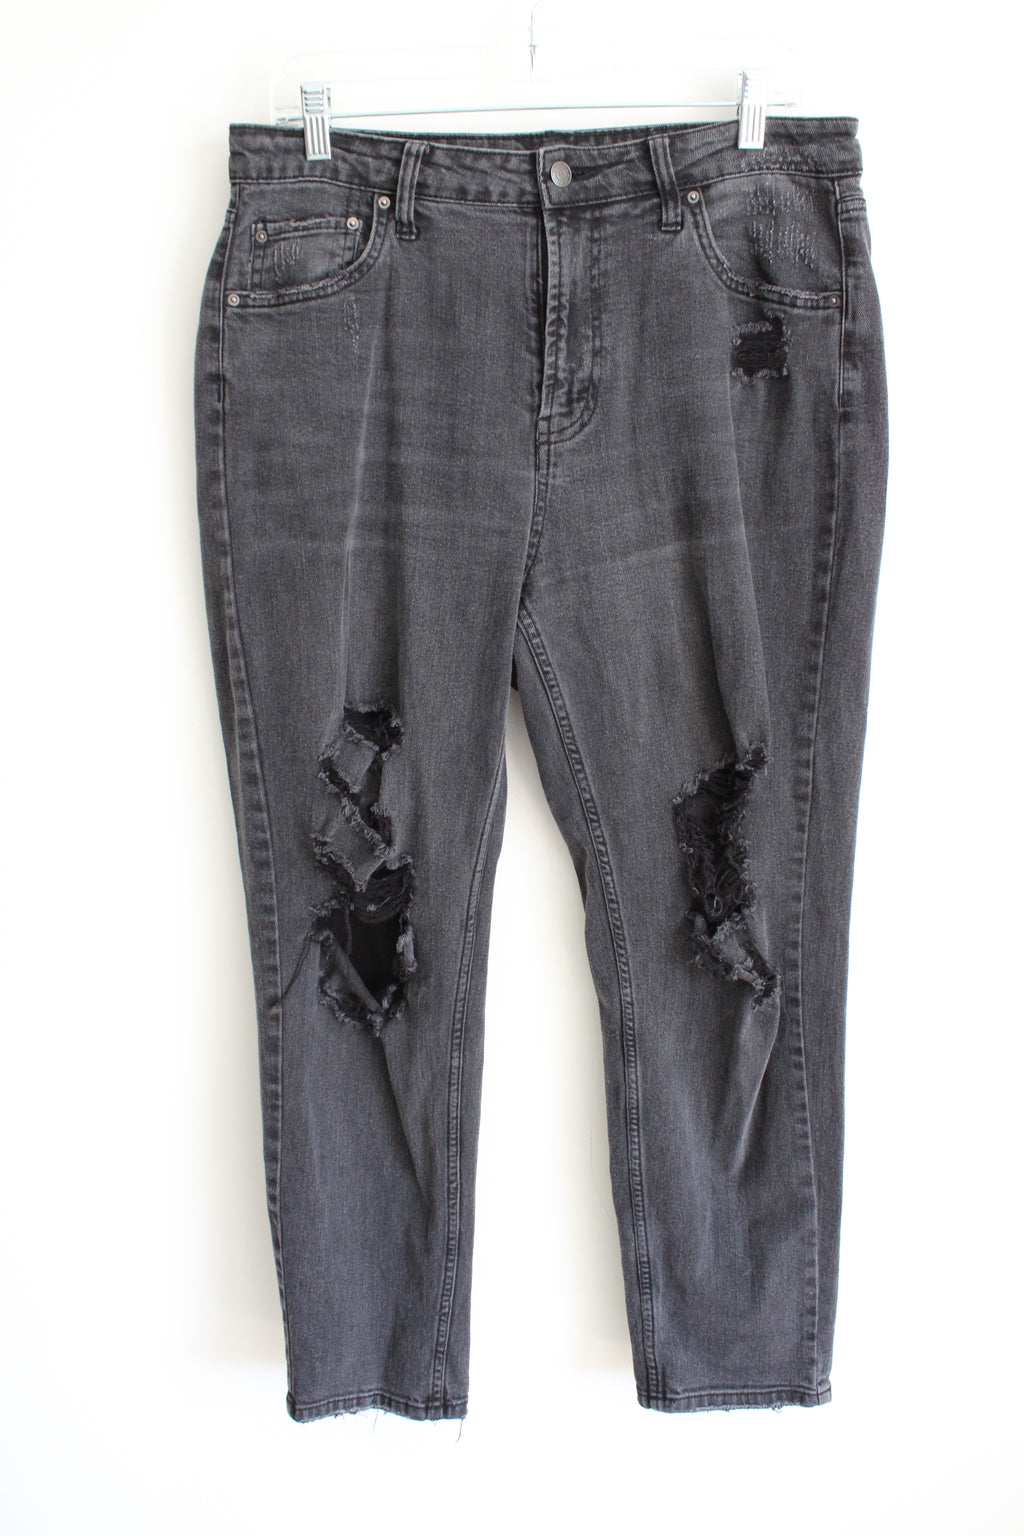 Wild Fable Washed Out Black Denim High Rise Mom Jeans | 10